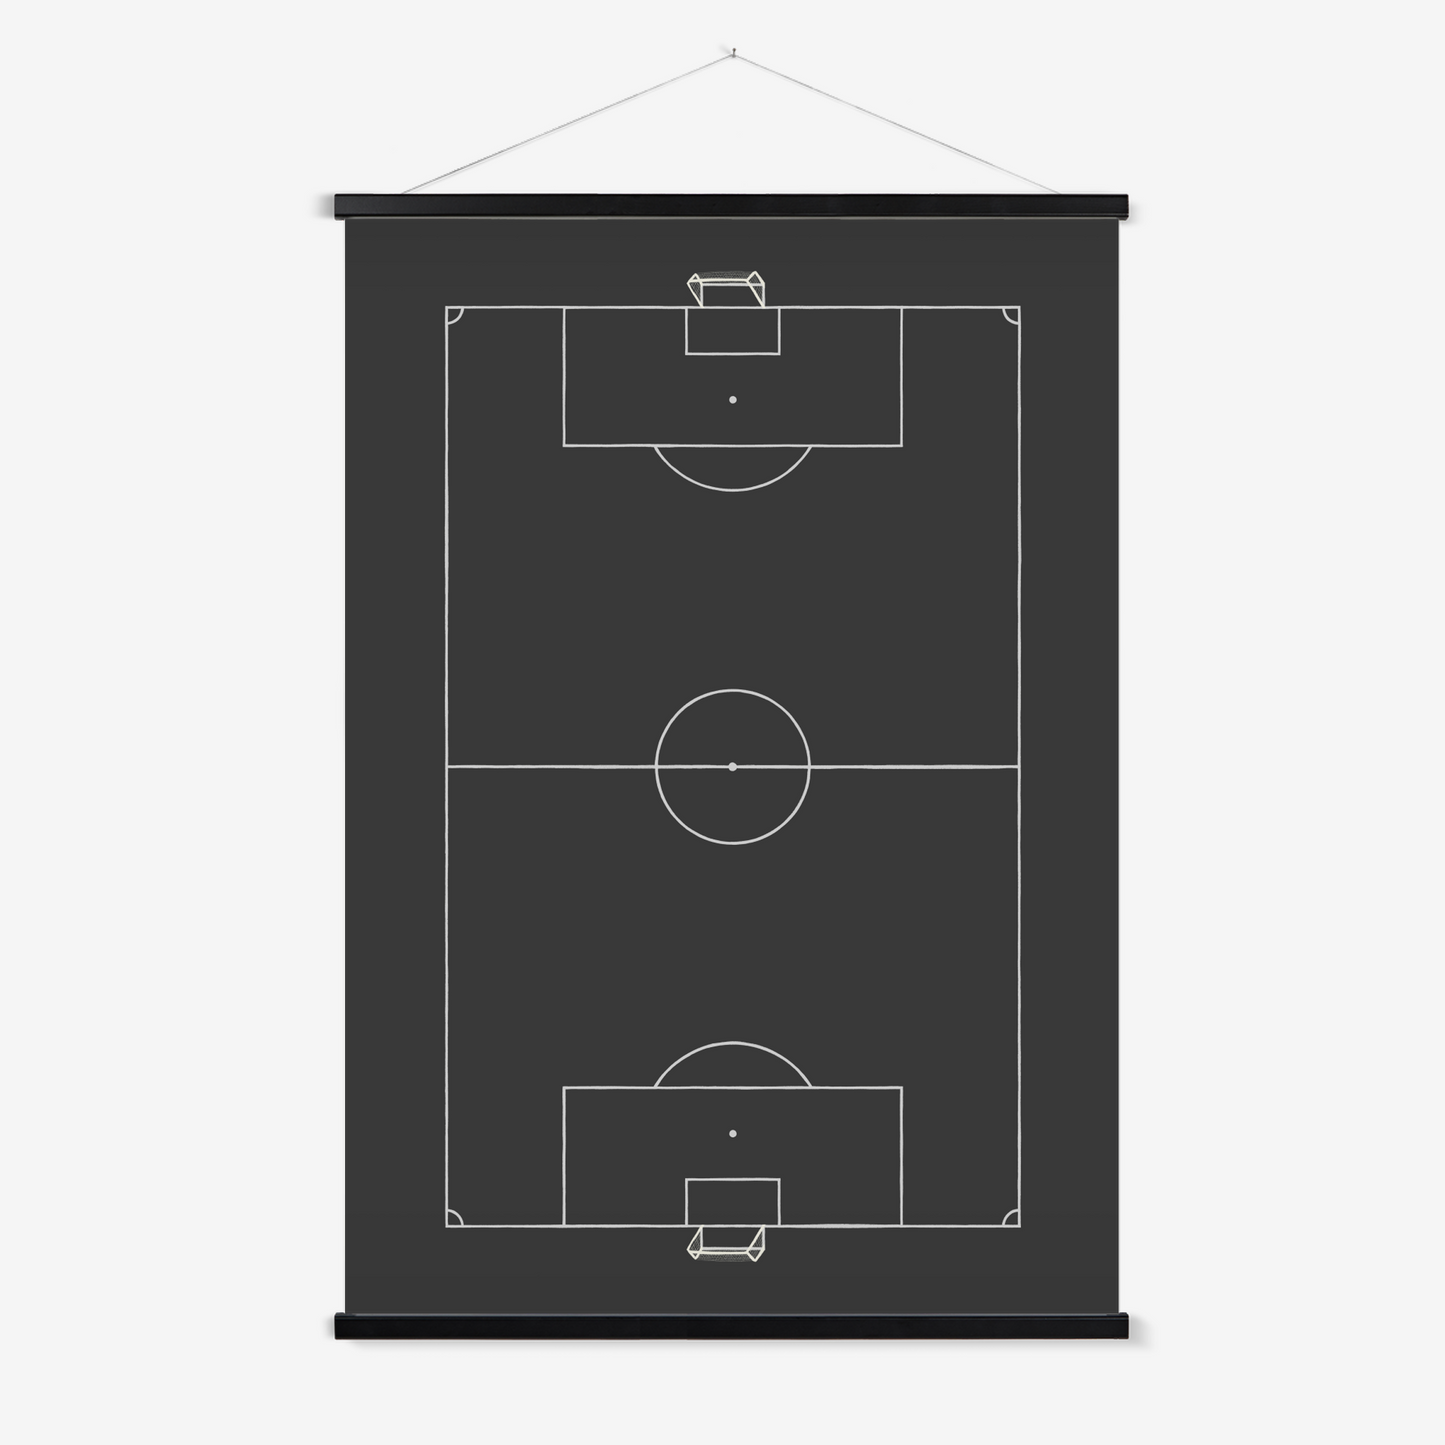 Football pitch in black / Print with Hanger